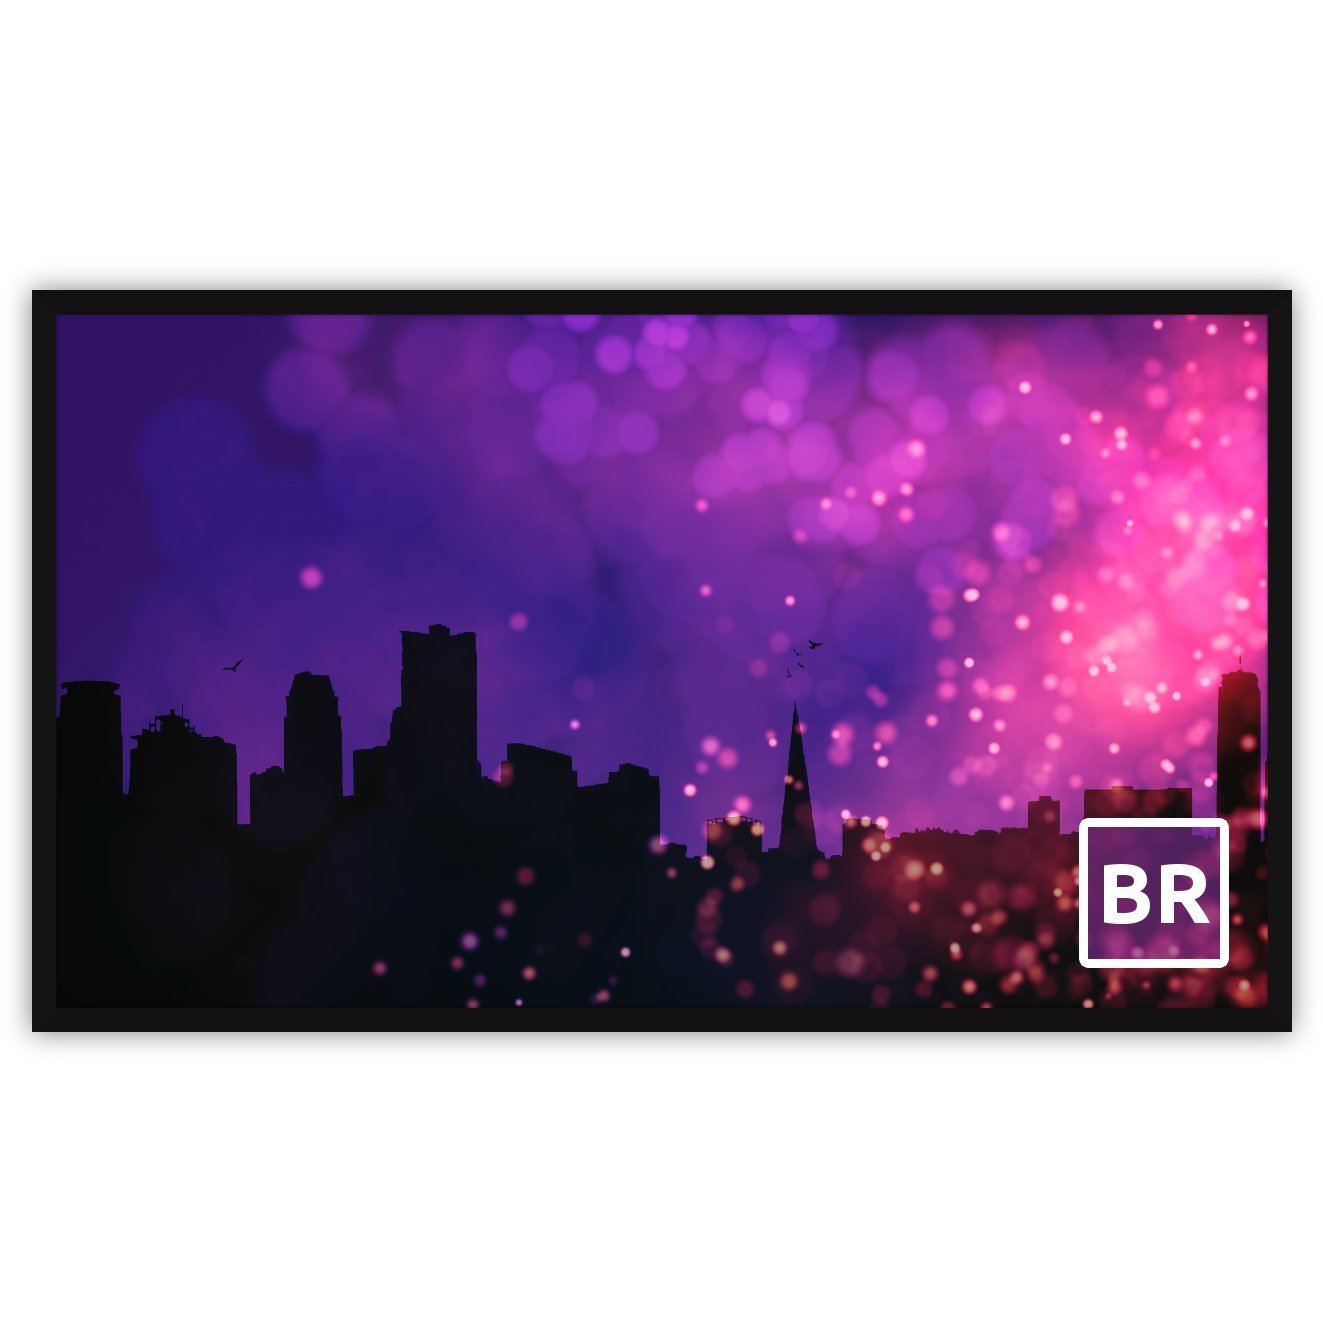 Broadway Series Screens from Severtson Screens are a perfect low-budget option for home theaters, conference rooms, and other applications where a permanent projection screen is desired.